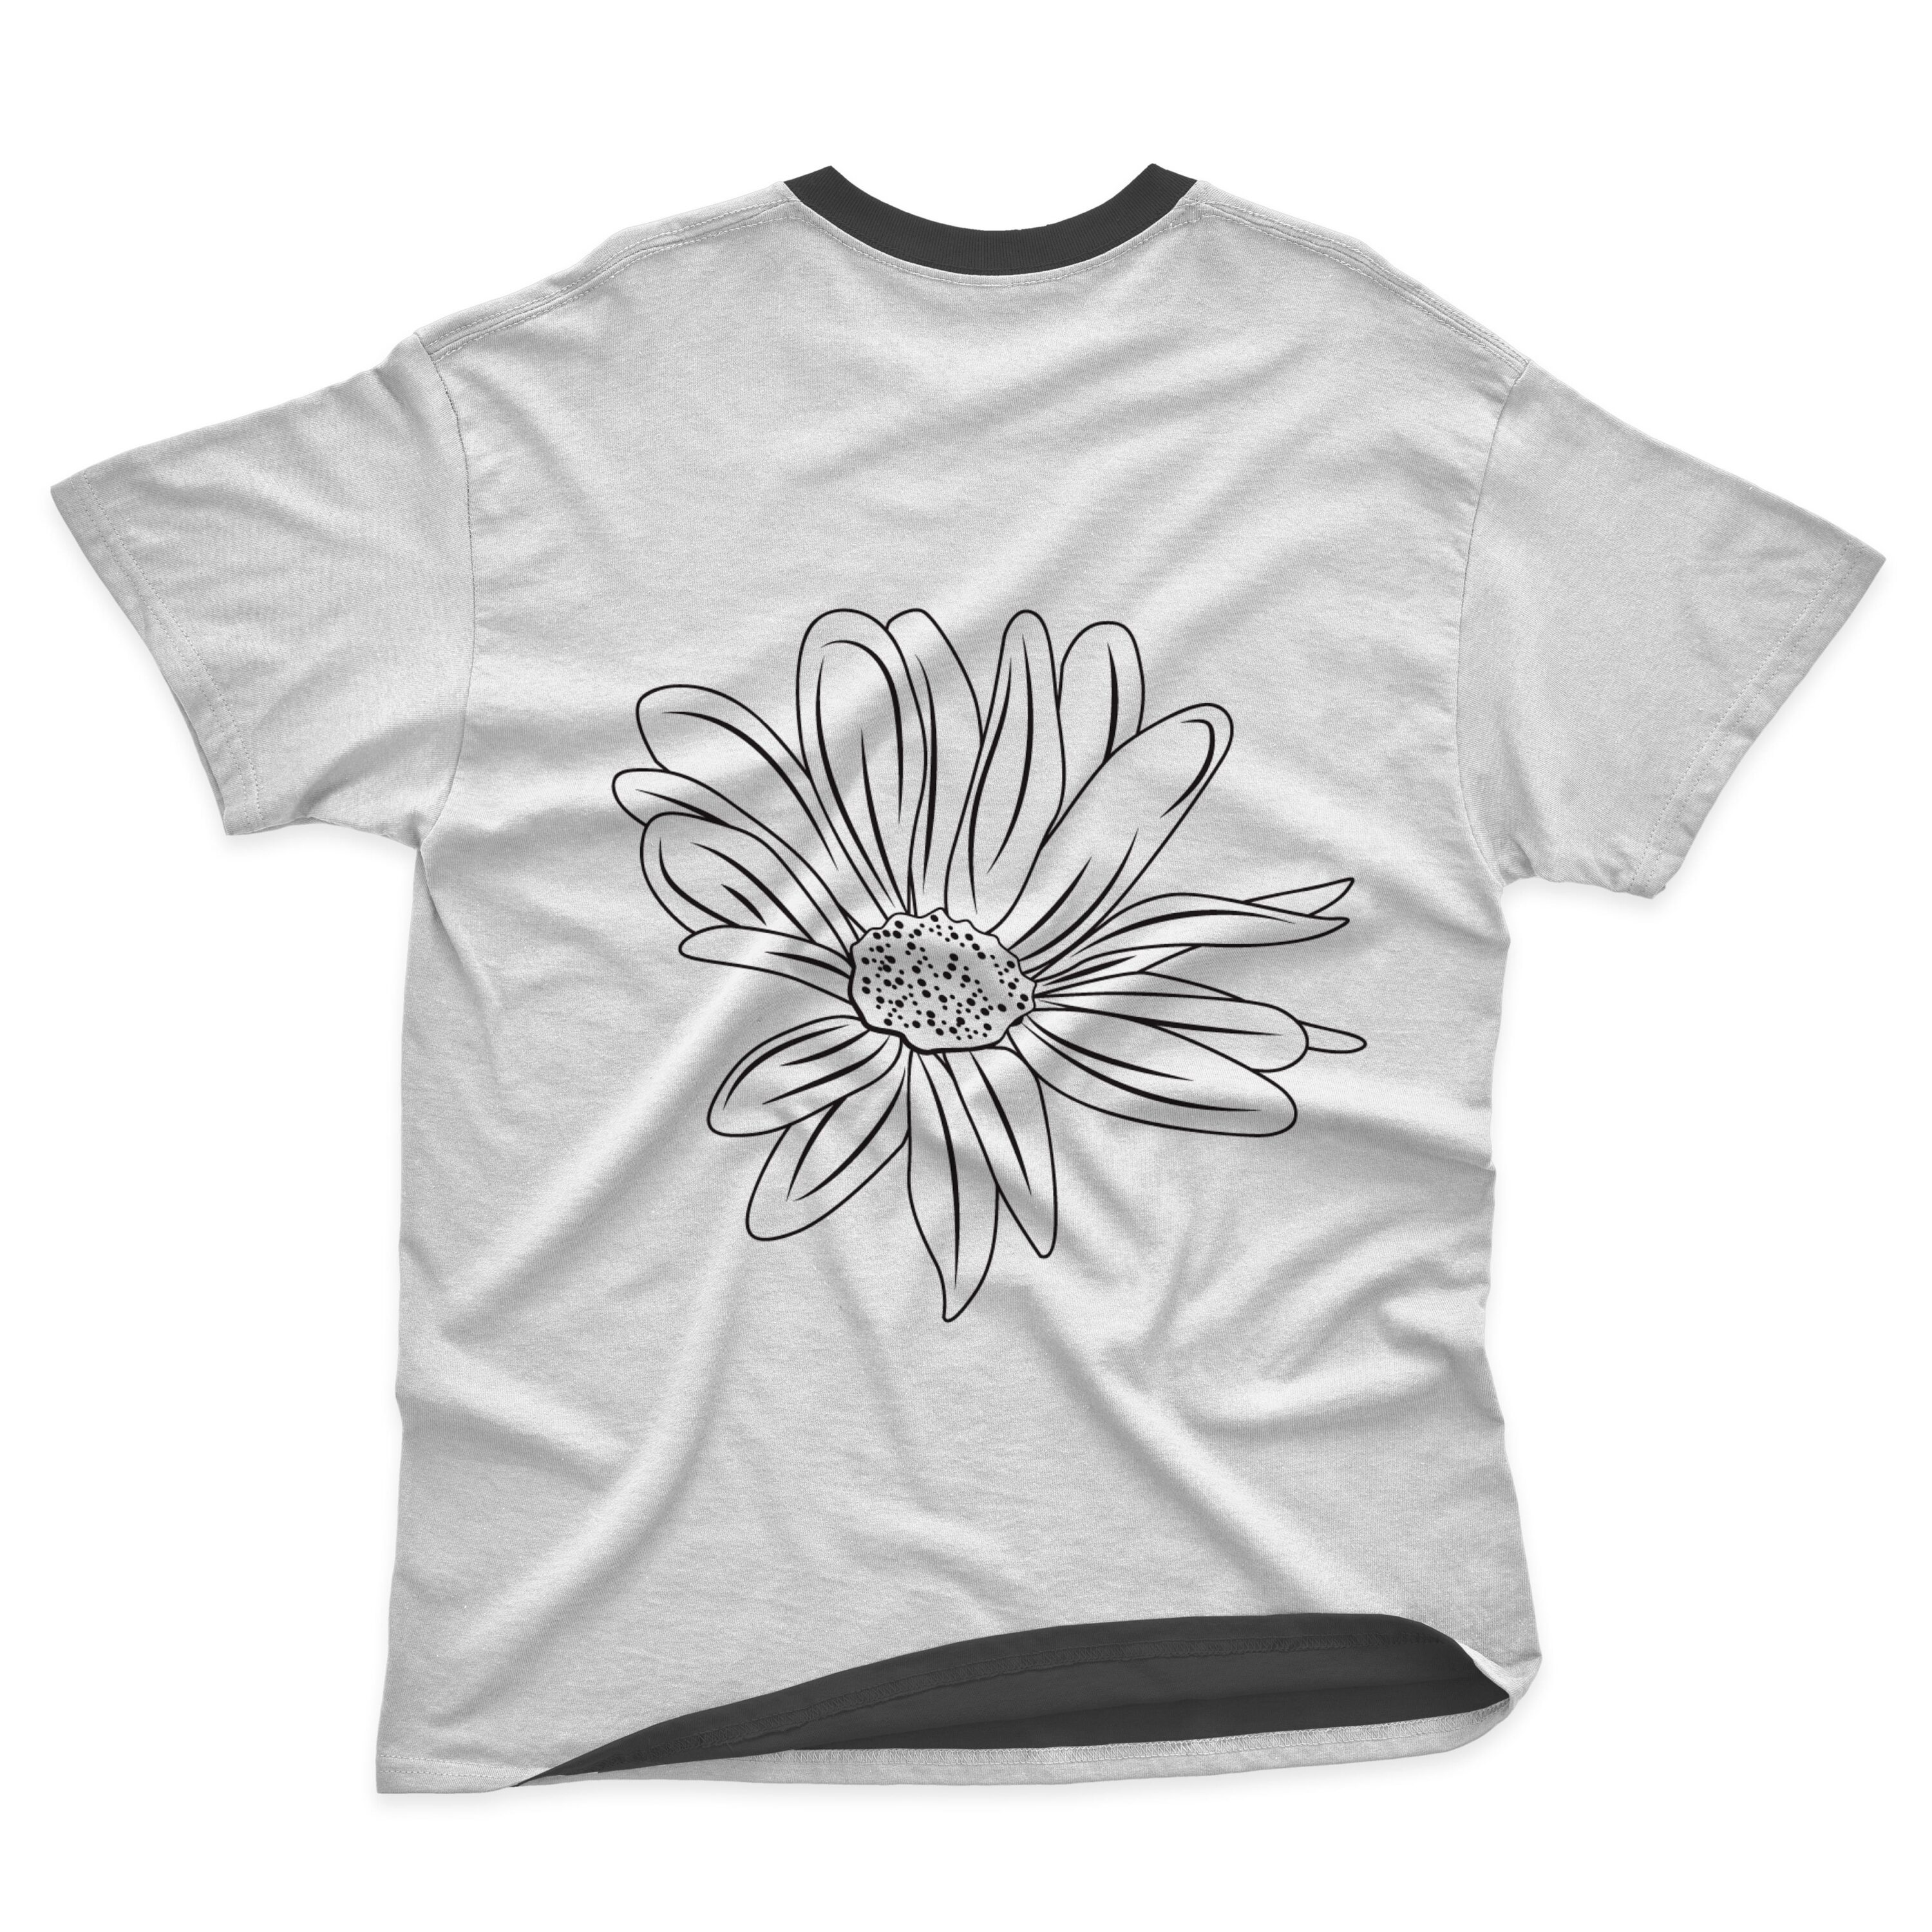 Outlined daisy design in minimalistic style.